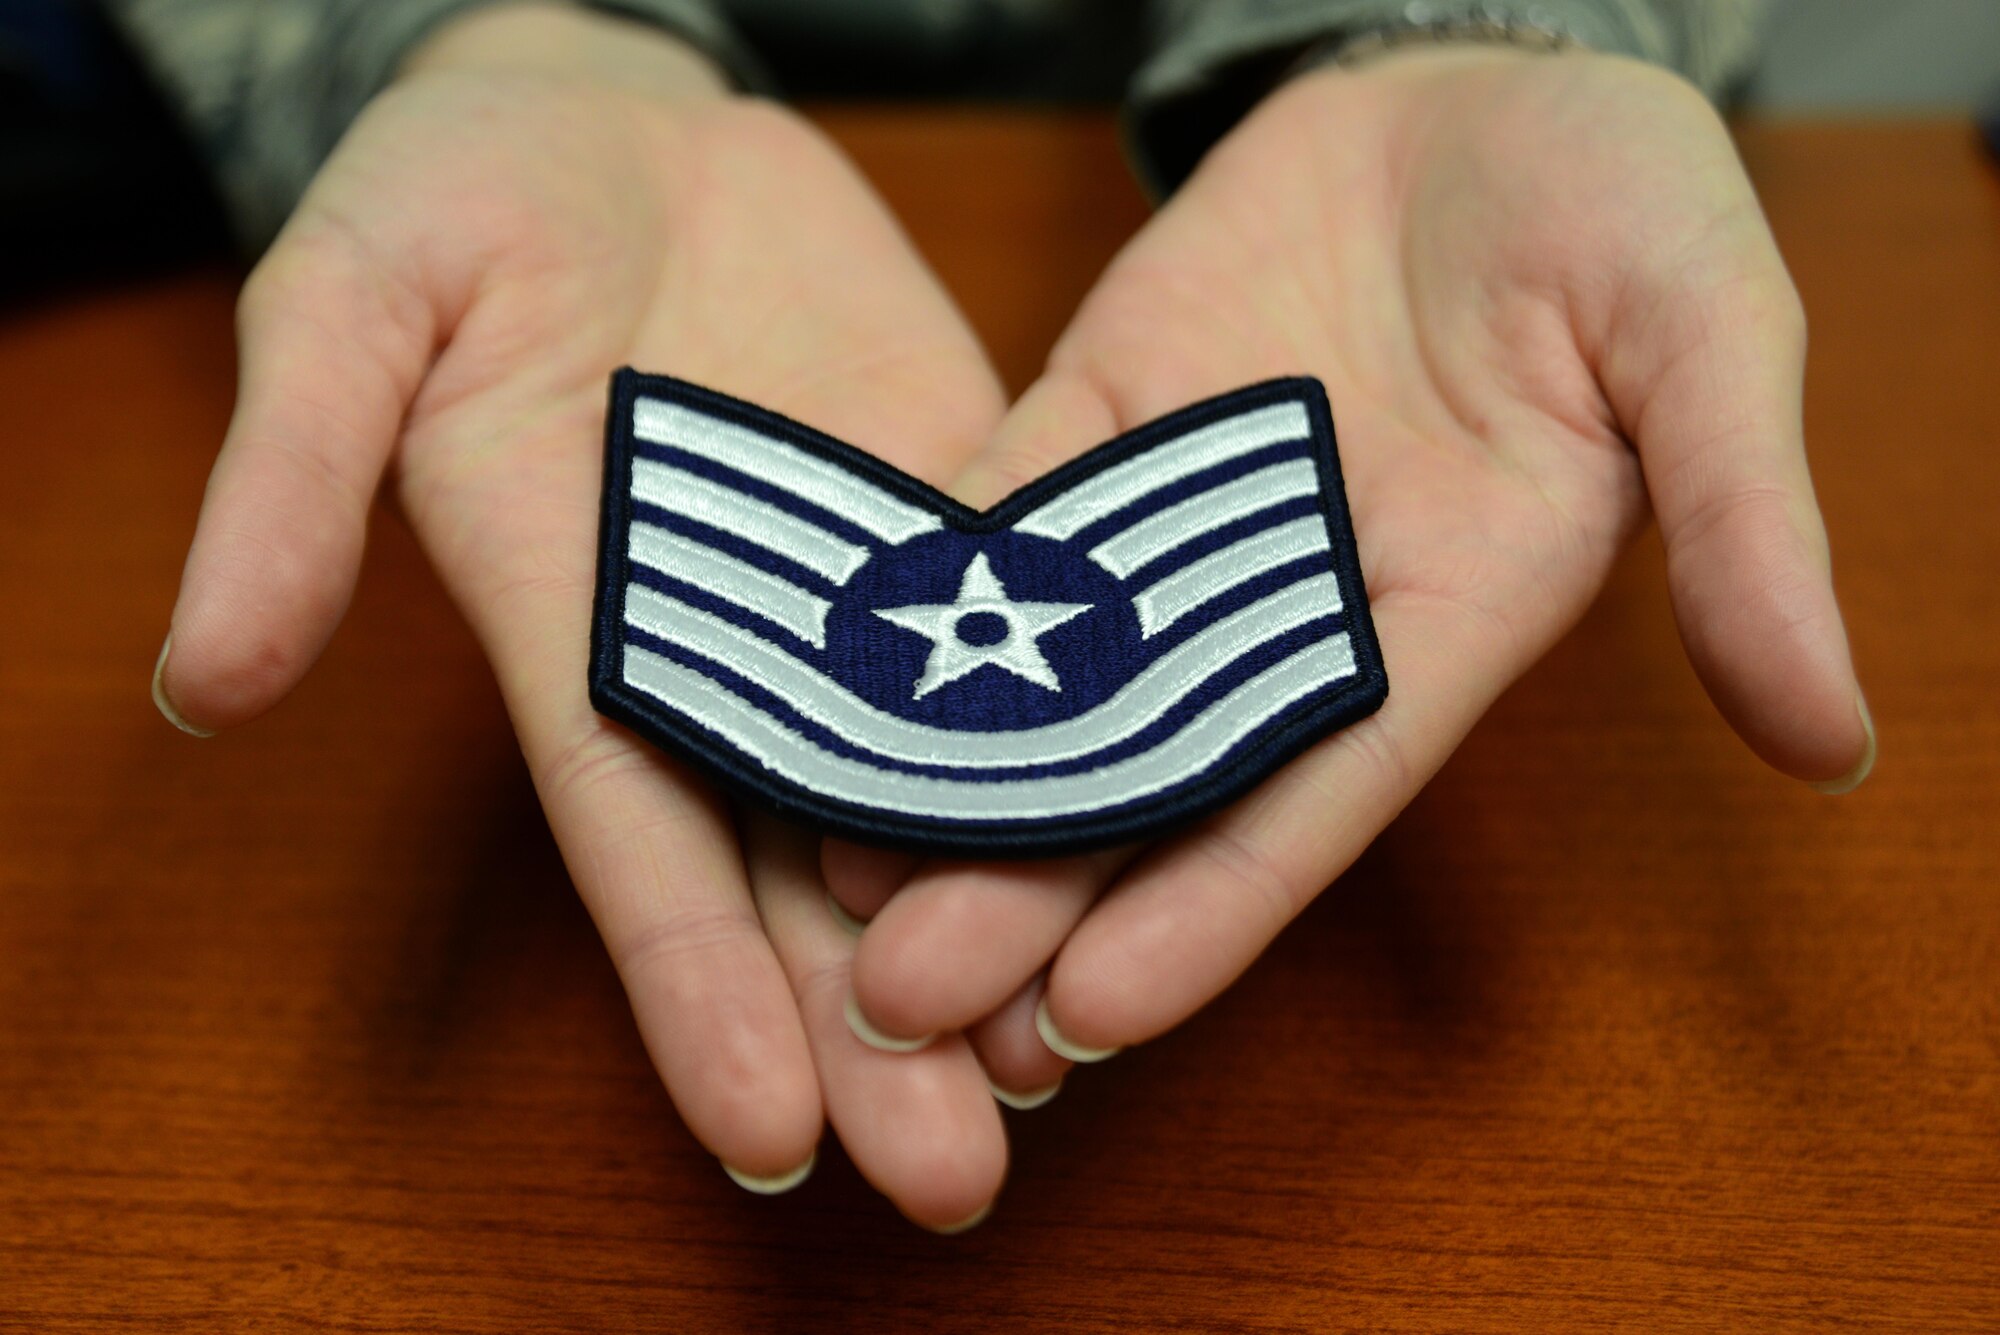 Technical Sgt. Jessica Tabor, 673d Equal Opportunity noncommissioned officer in charge, holds her recently earned technical sergeant stripes at Joint Base Elmendorf-Richardson, Alaska, Dec. 29, 2016. She dedicated her promotion to her late supervisor because she said she earned them through his teachings and guidance.